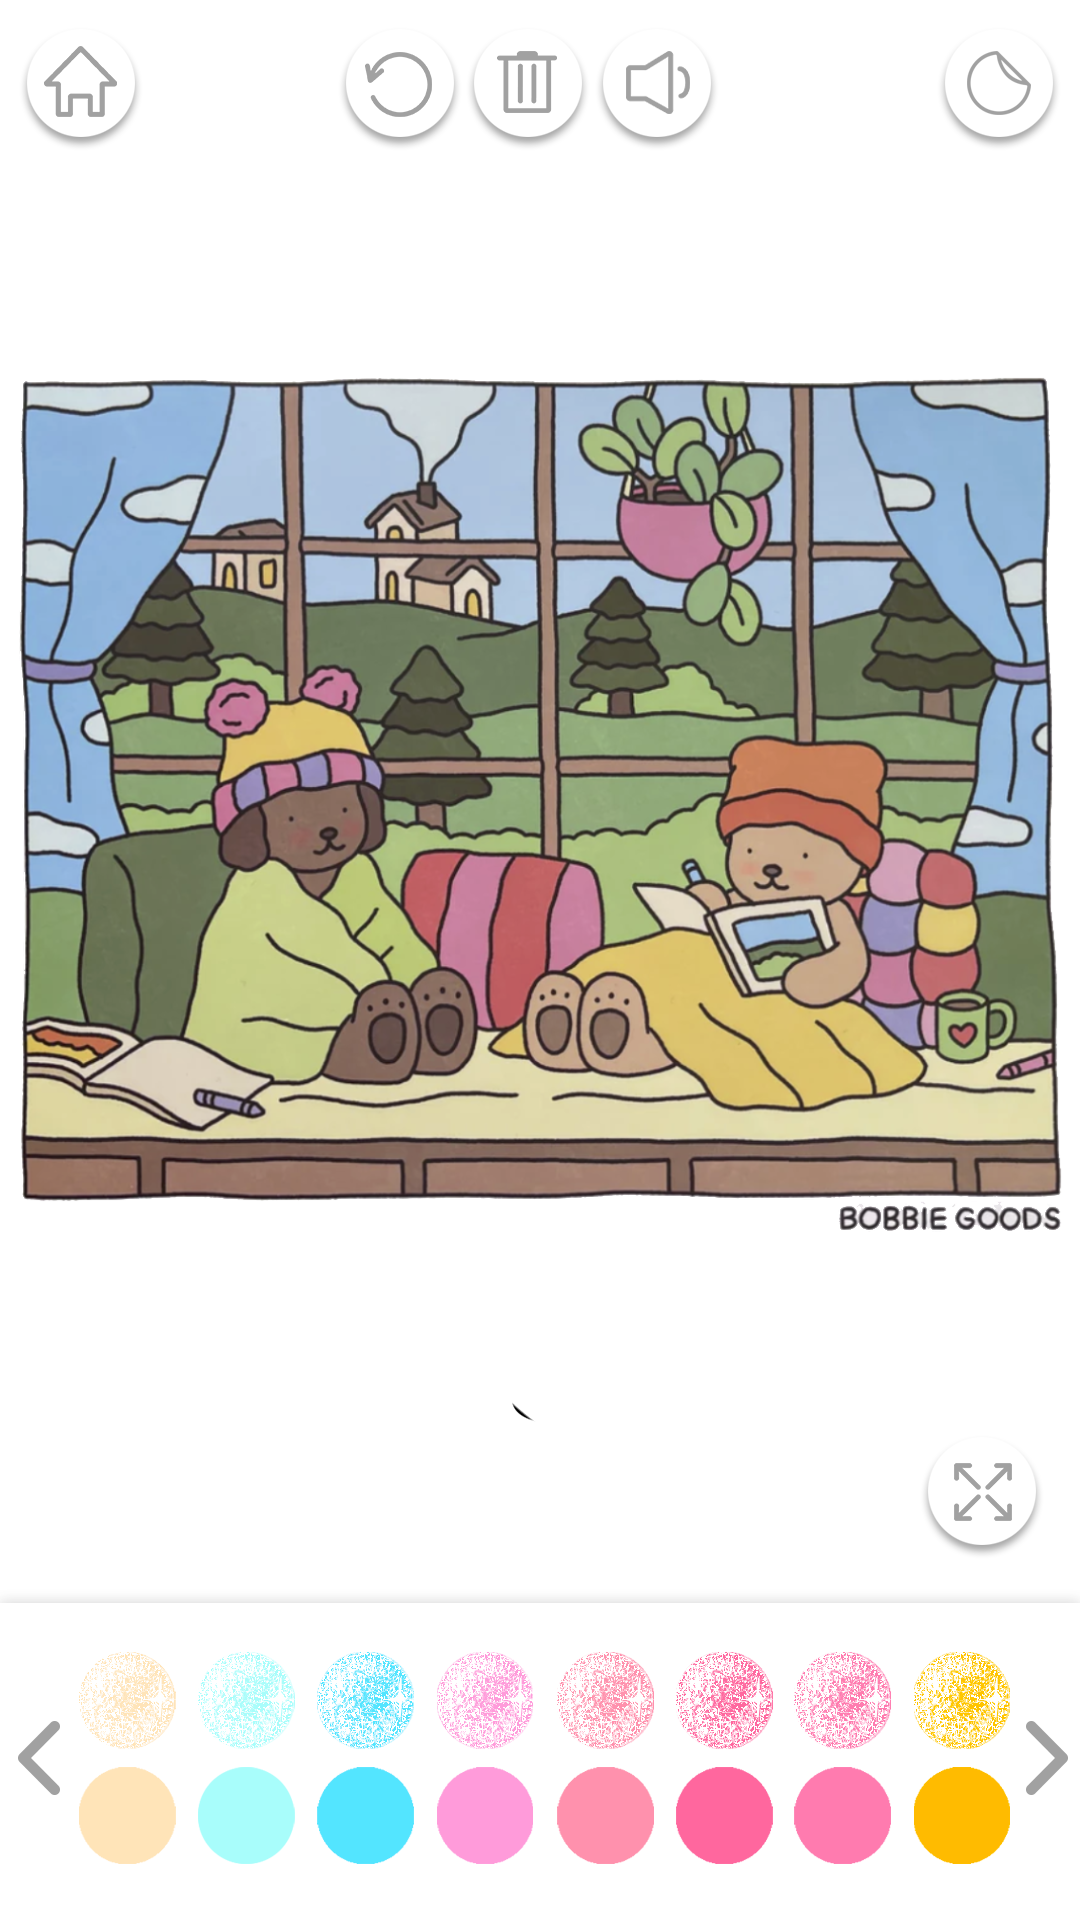 Bobbie Goods Coloring Pages For Kids - ColoringPagesWK  Coloring pages,  Bear coloring pages, Cute coloring pages